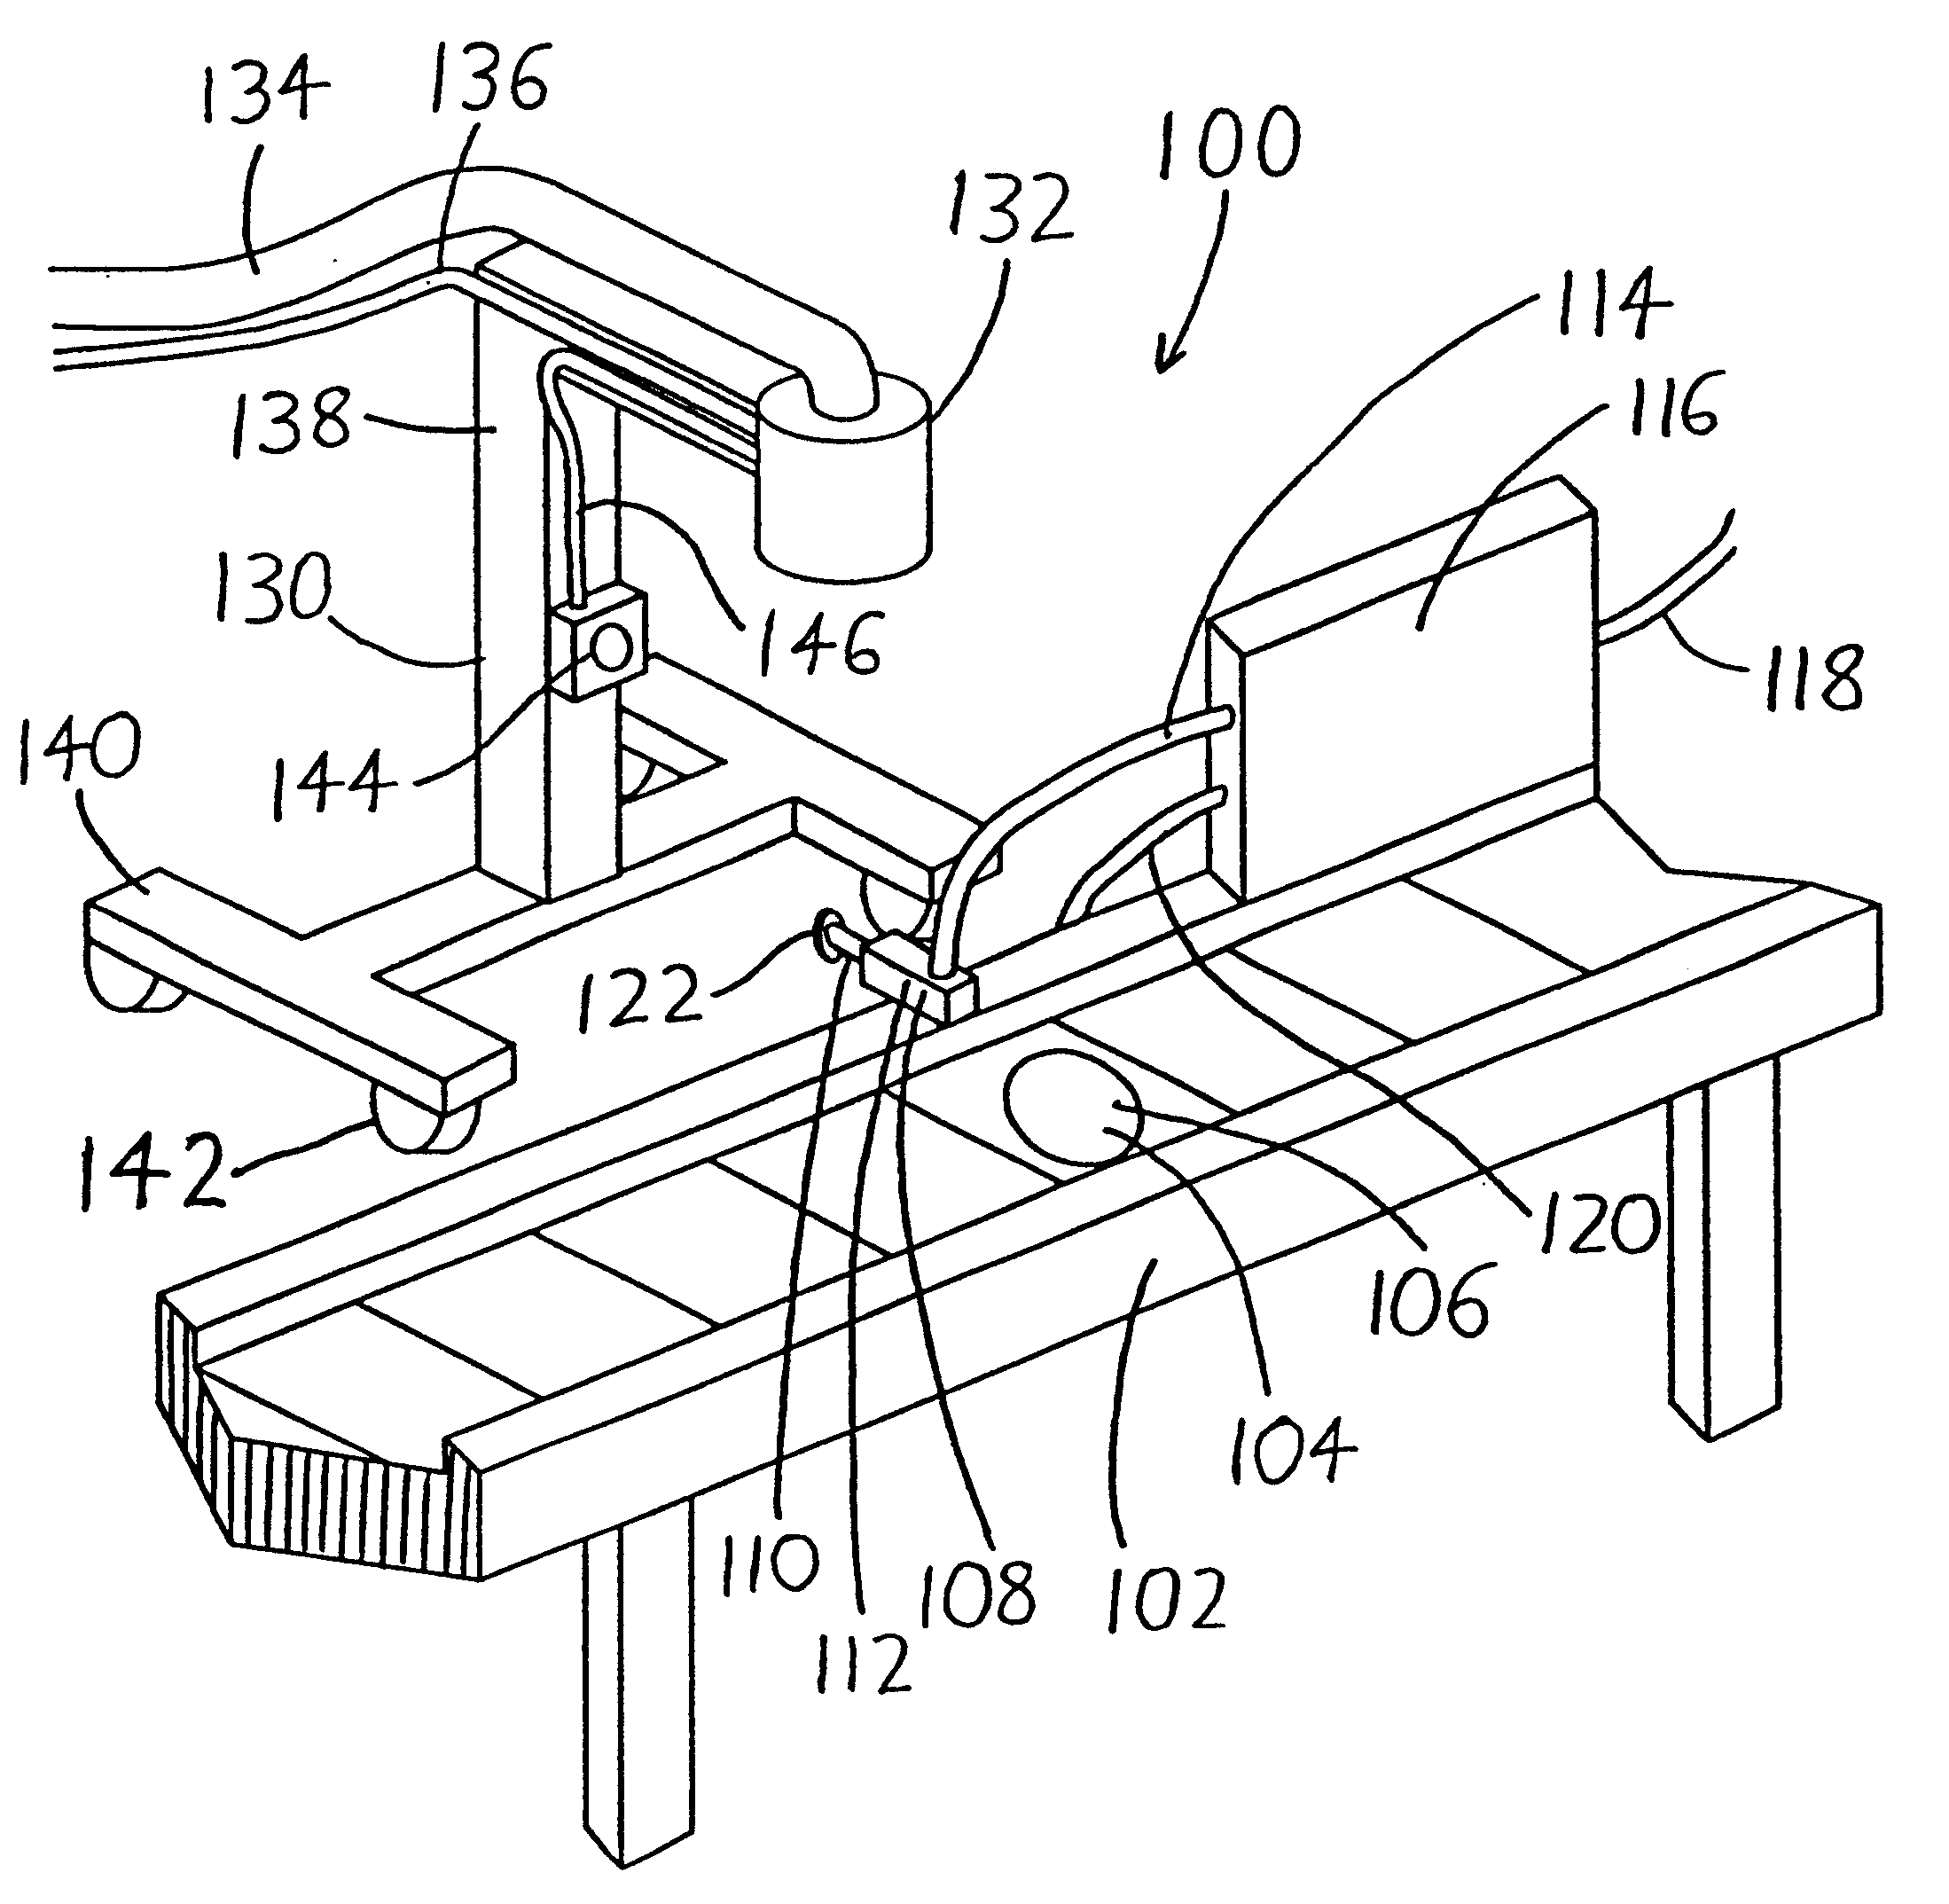 Mobile fluid product filling system with fast setup